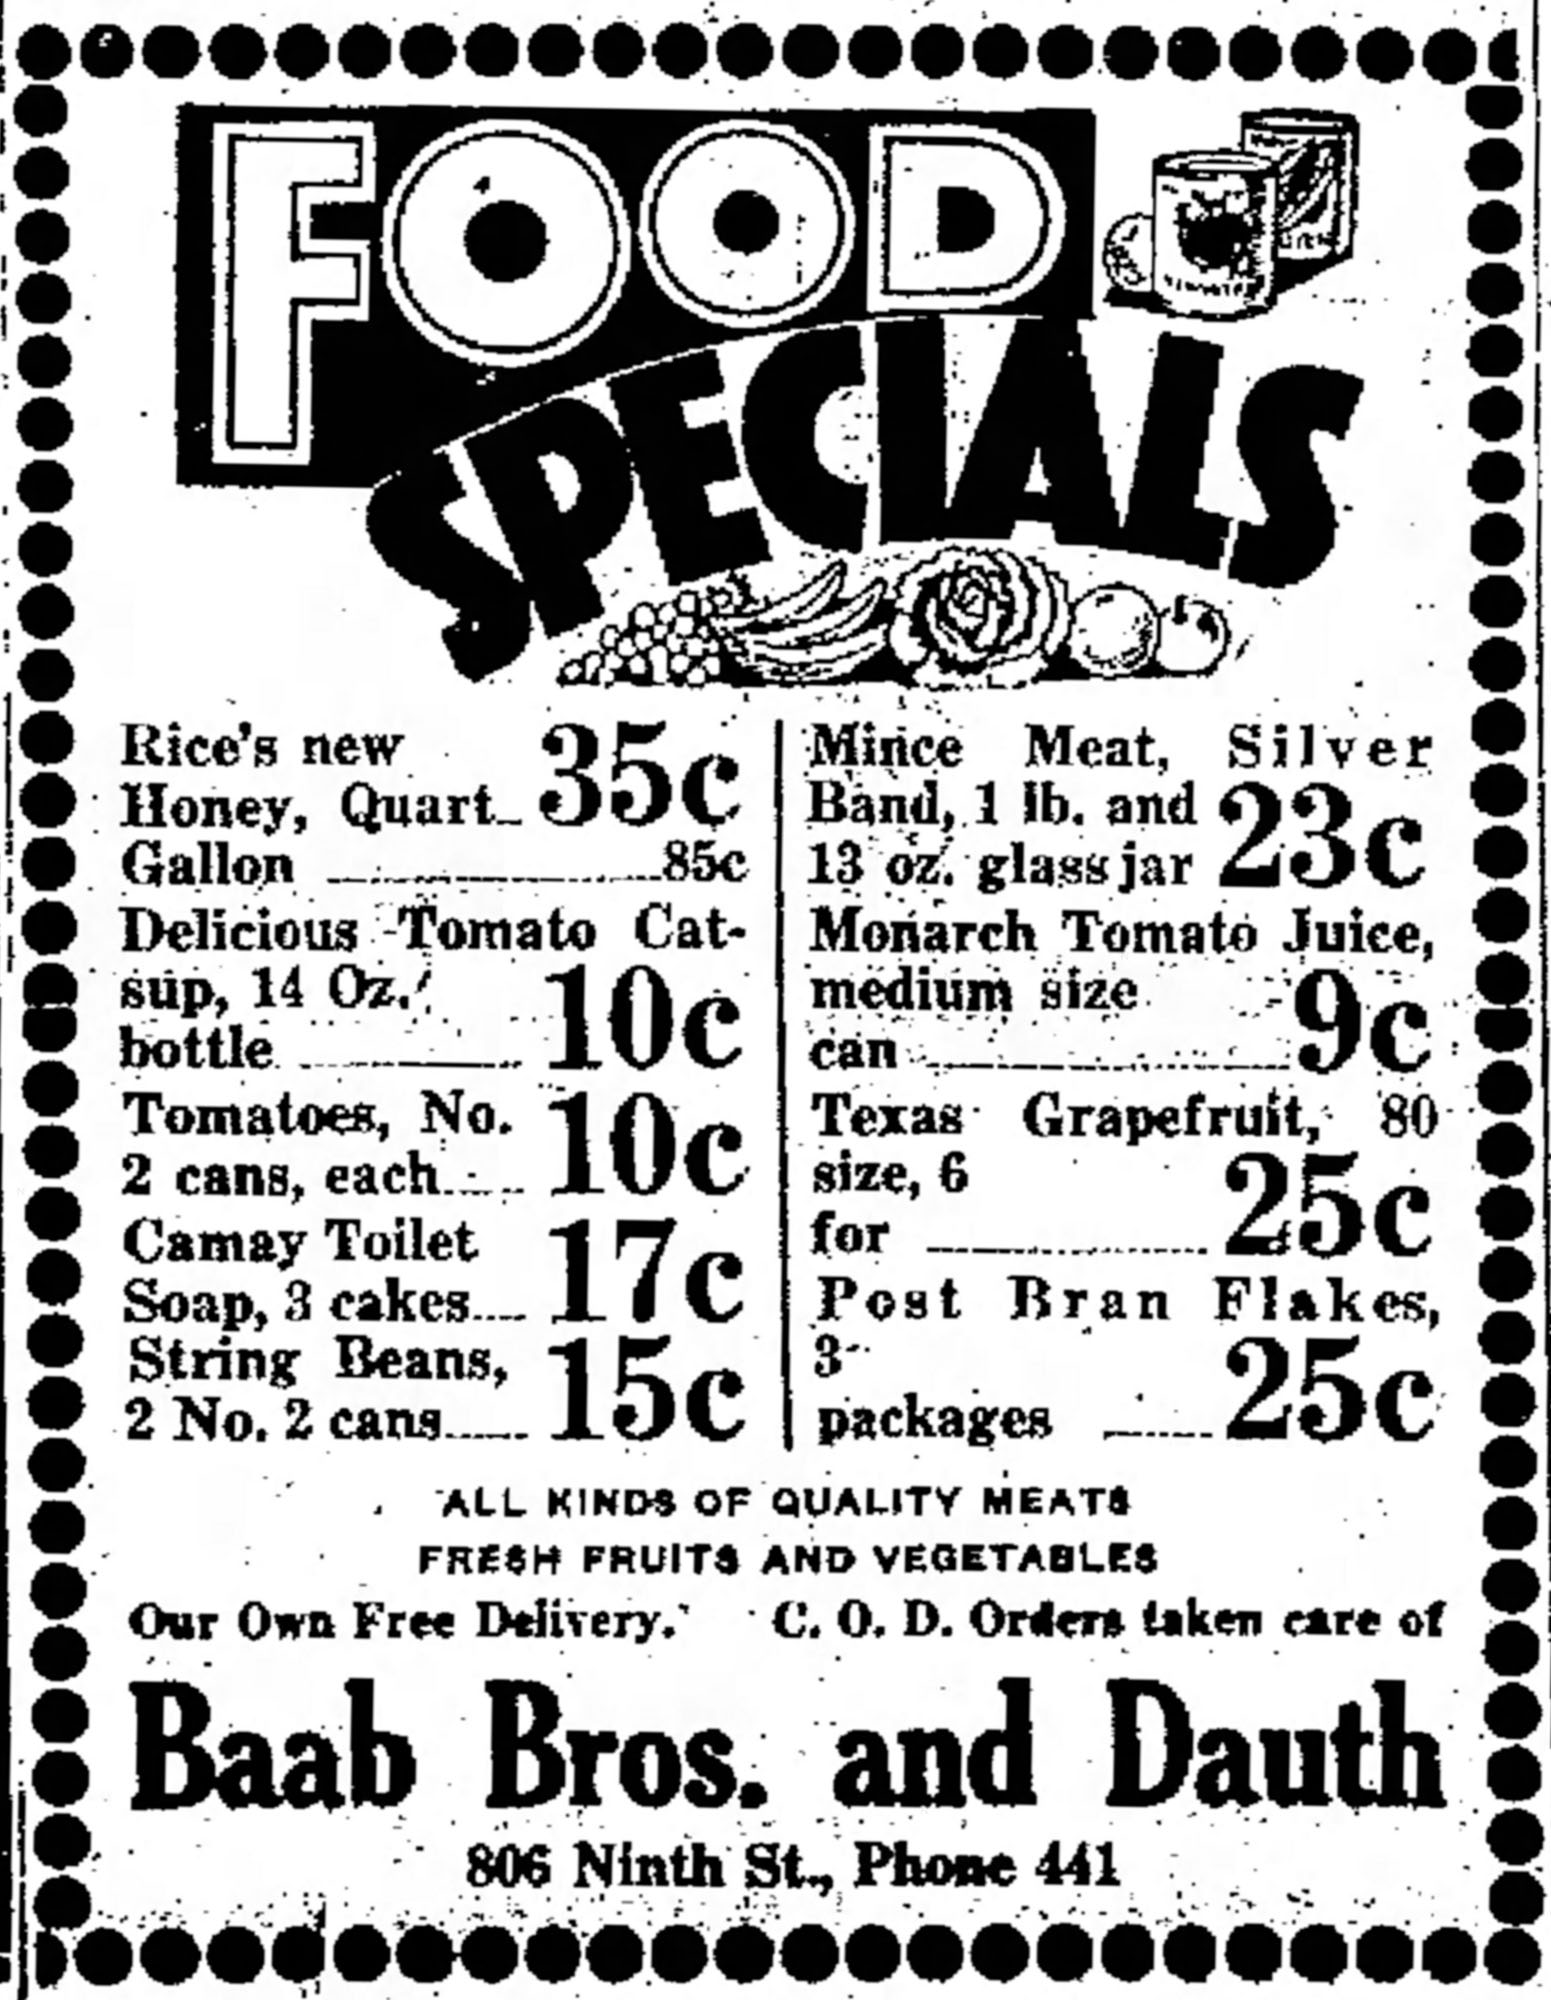 Dauth Family Archive - 1932-11-04 - Greeley Daily Tribune - Baab Bros and Dauth Advertisement